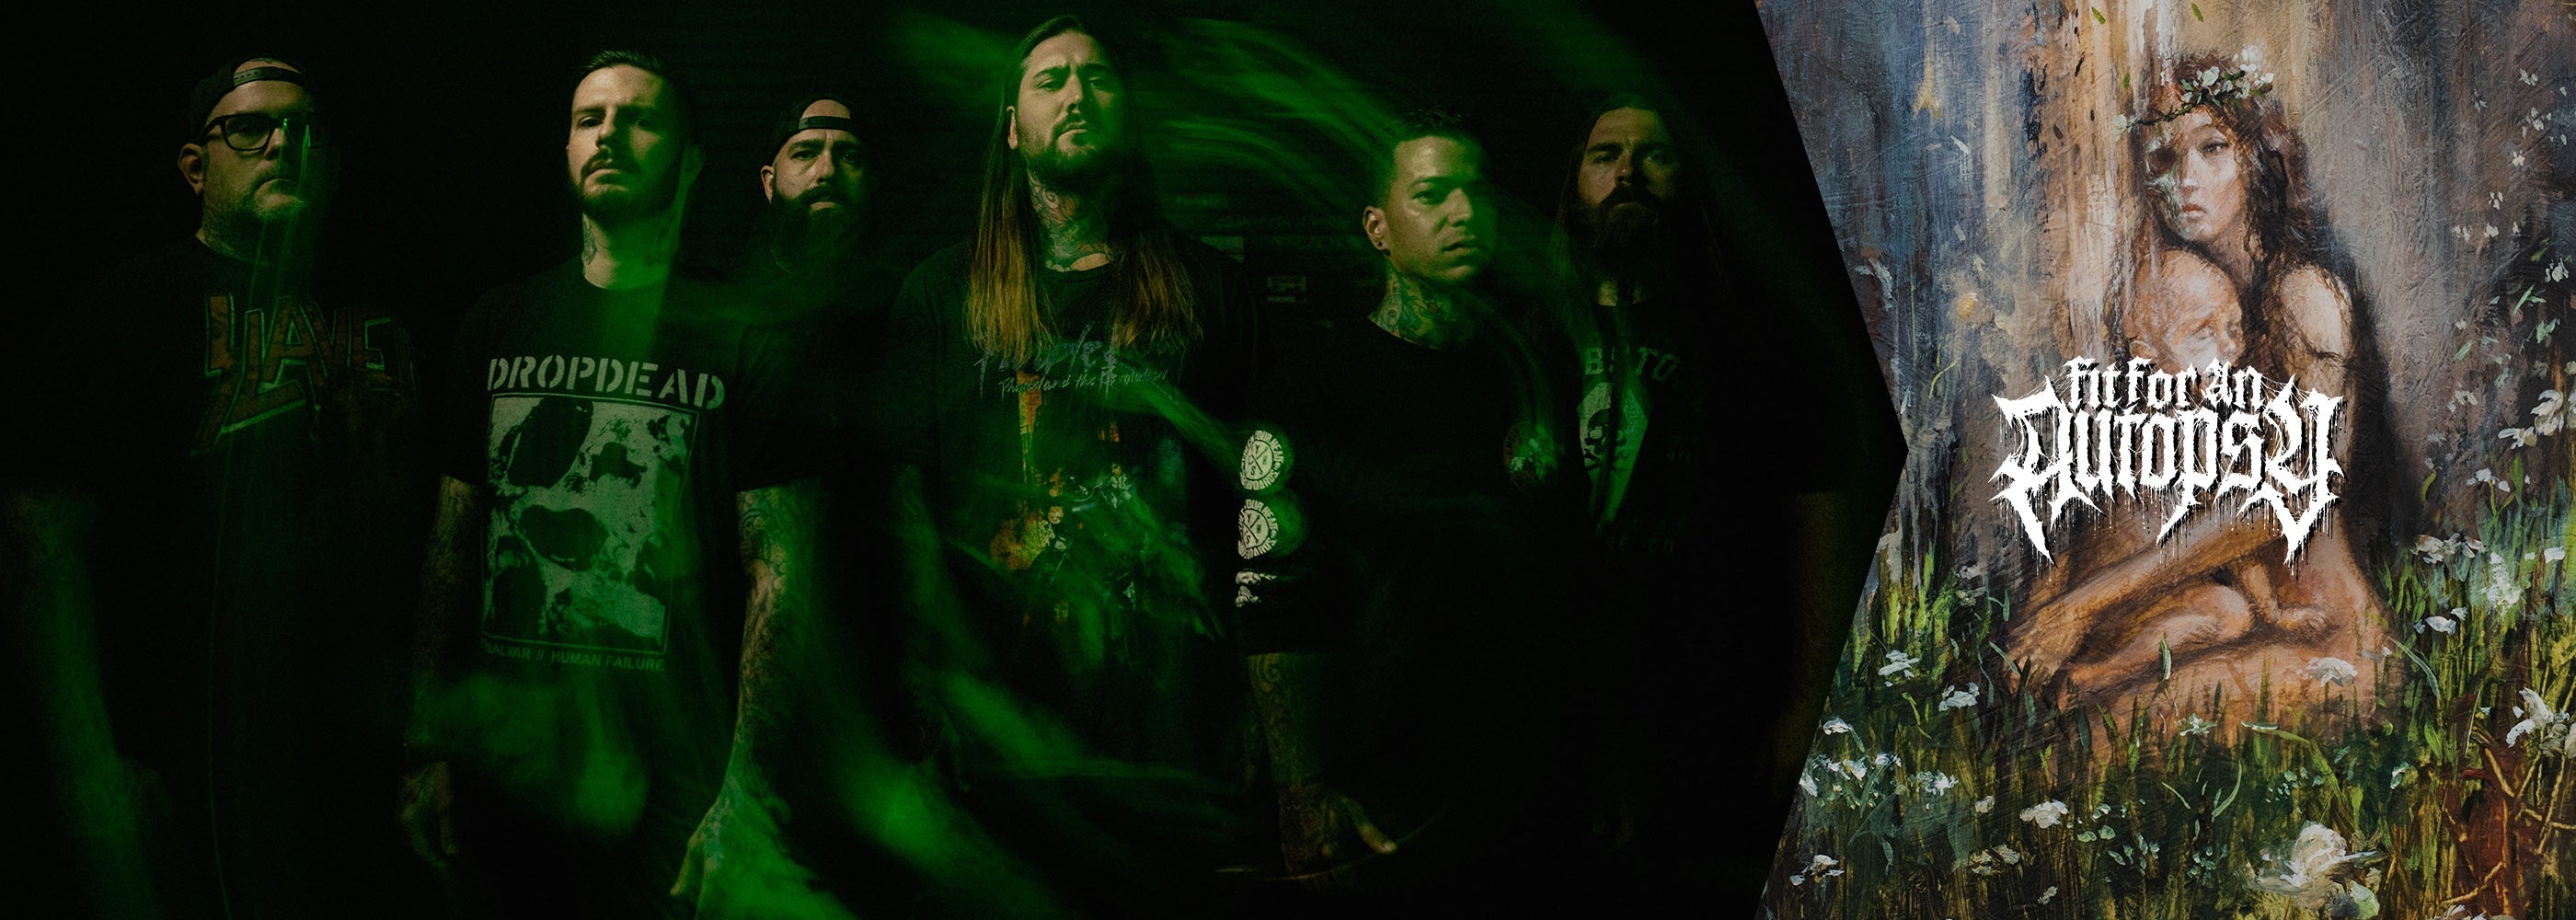 Fit For An Autopsy - Header